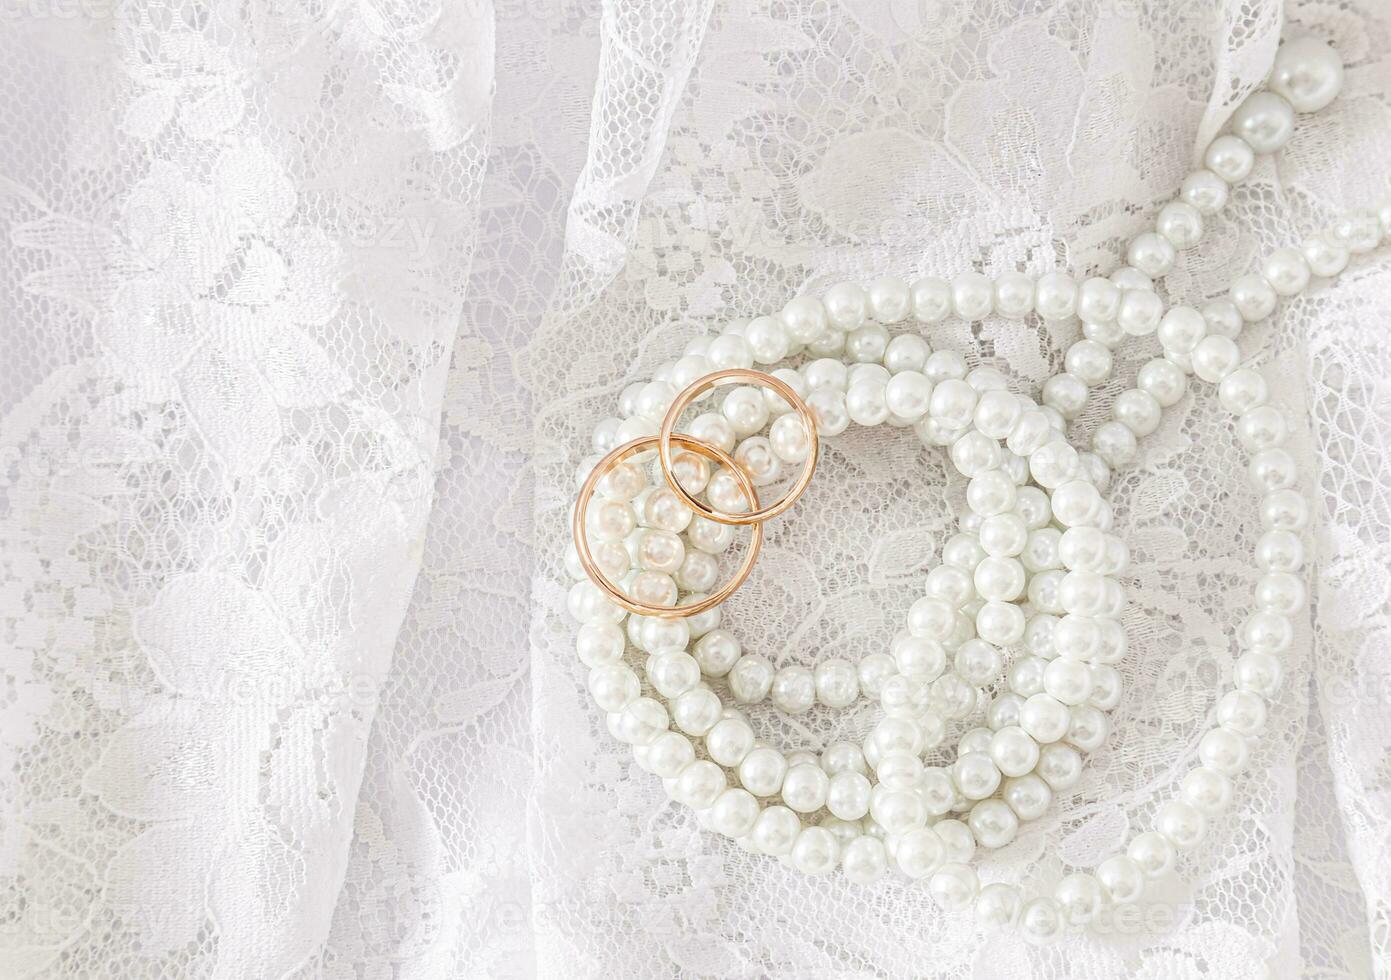 Two gold wedding rings lie on a luxurious vintage part of the bride's wedding dress with a string of pearl beads. Wedding concept. Top view. photo